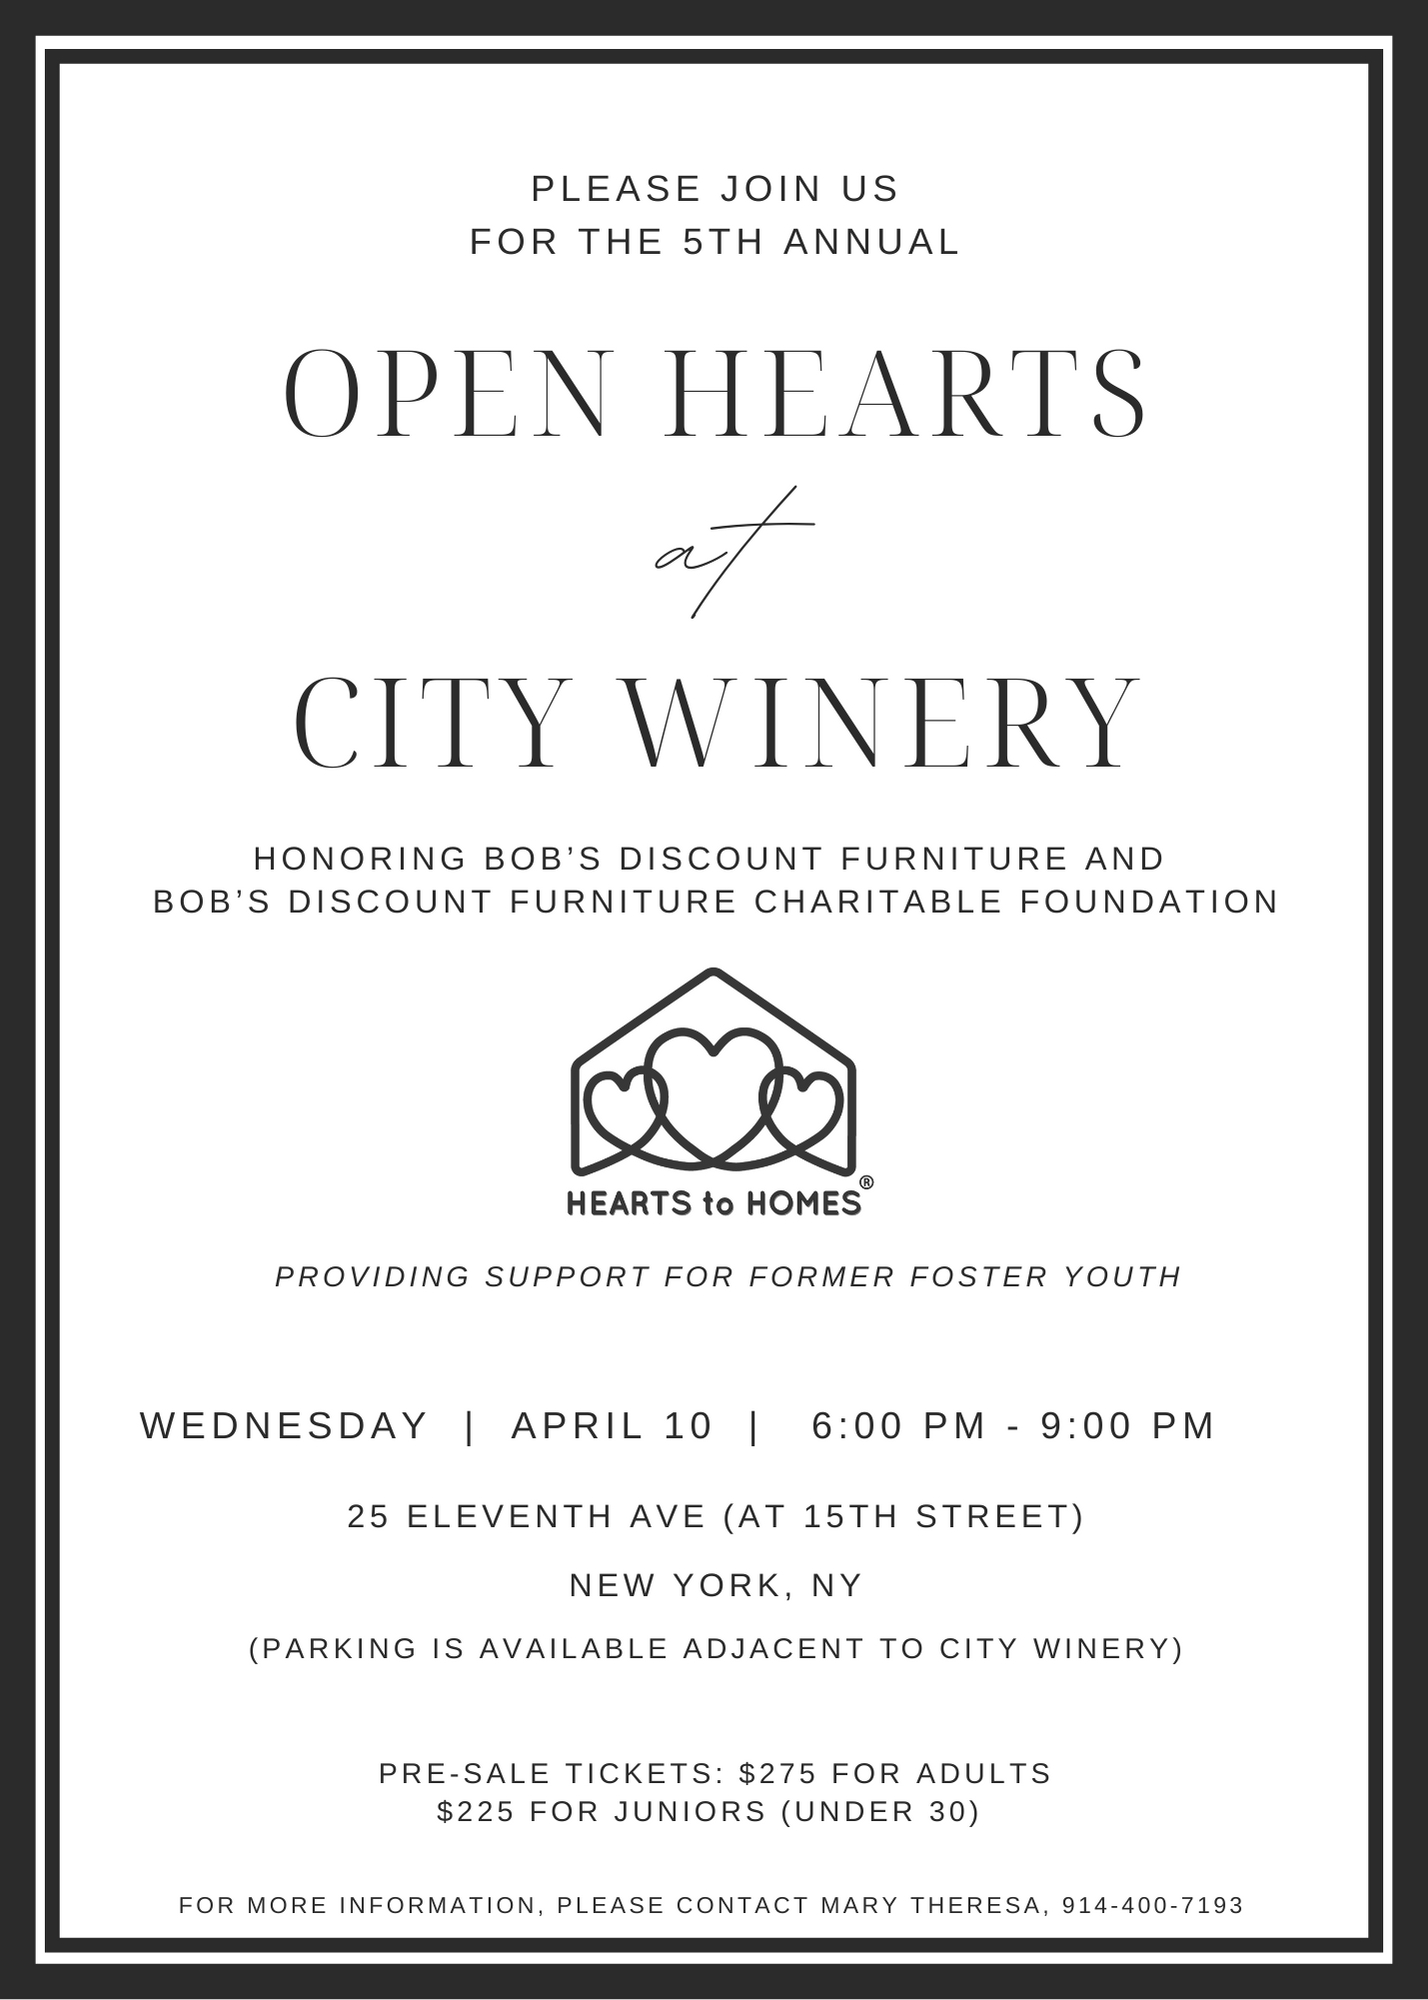 Open Hearts at City Winery SaveTheDate